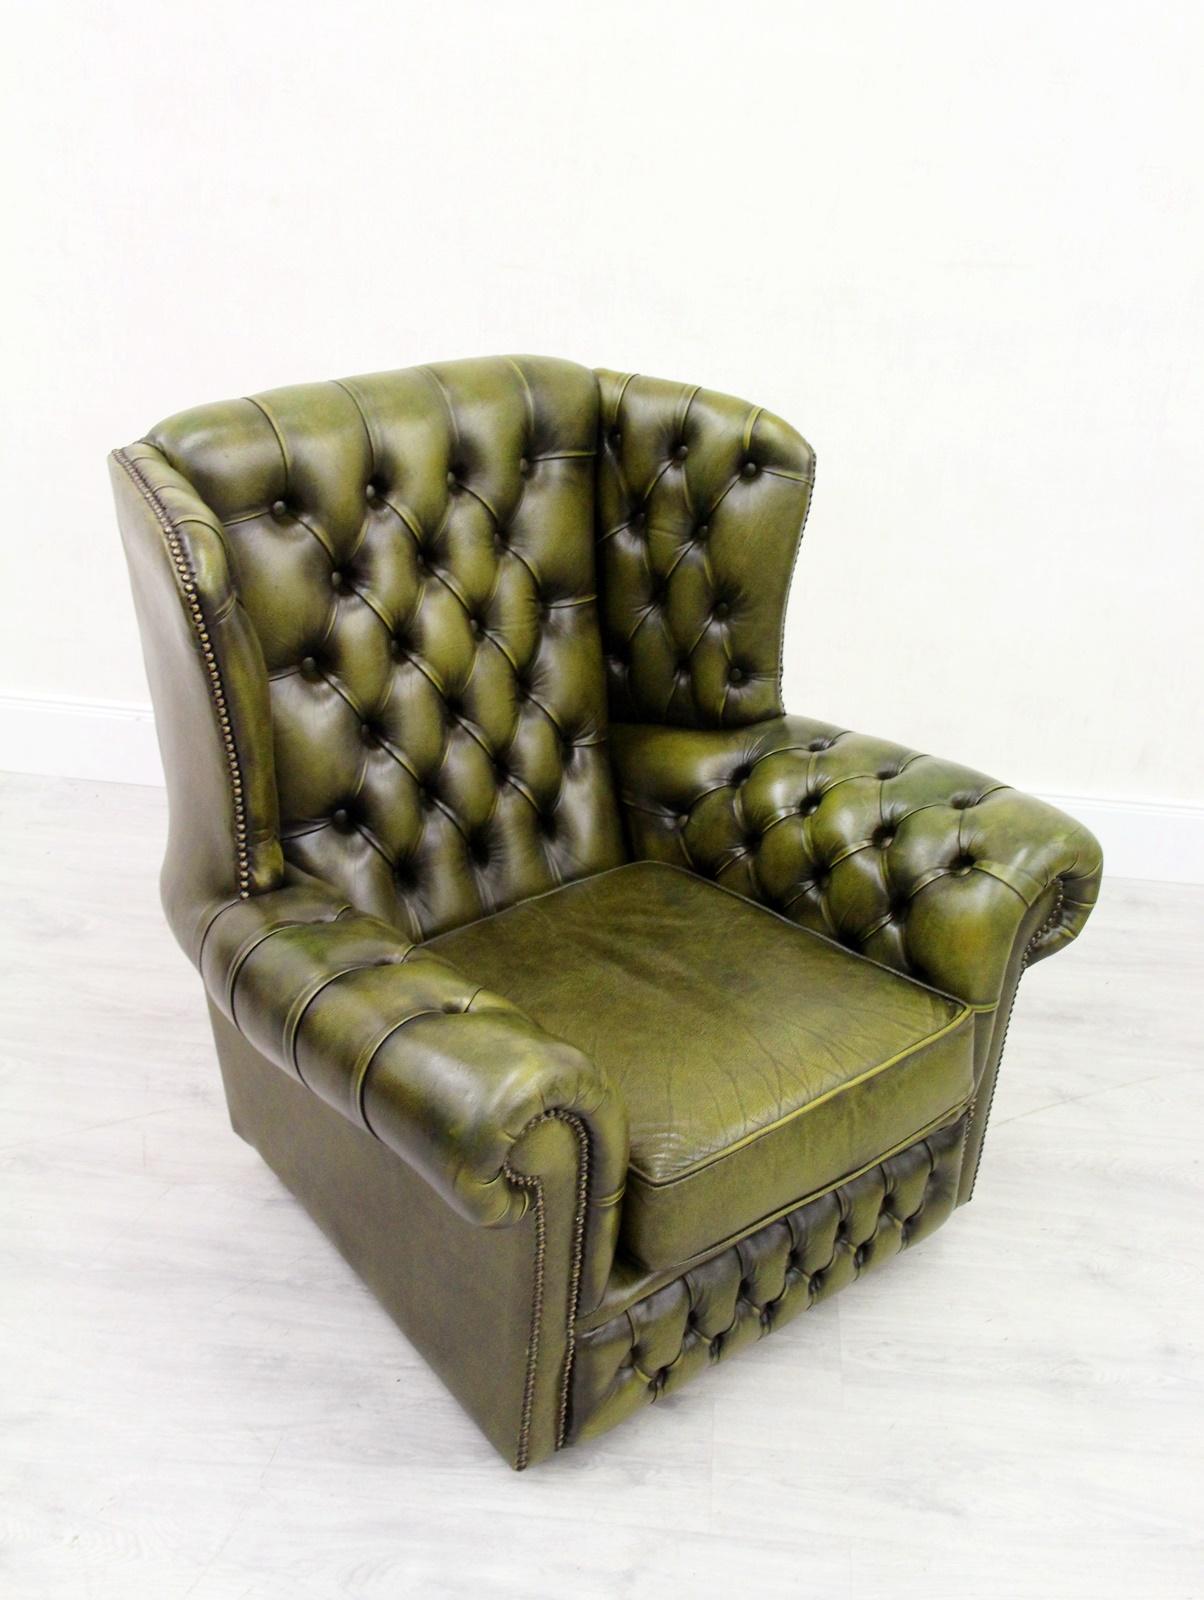 4 Chesterfield Chippendale Wing Chair Armchair Baroque Antique For Sale 5